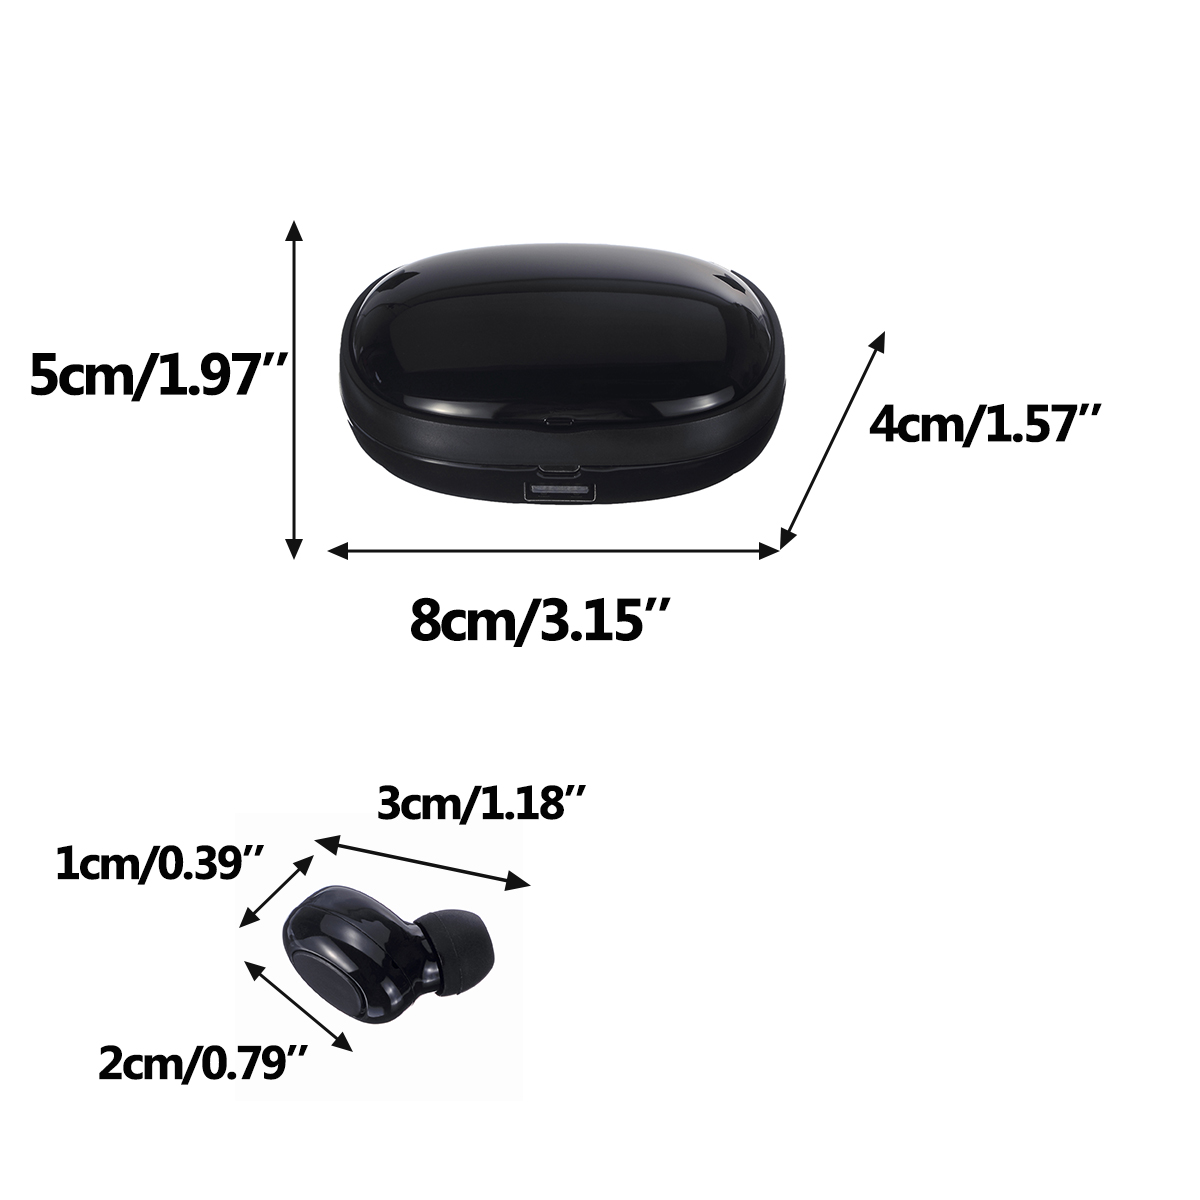 Dual-Digital-Display-True-Wireless-Headset-Button-Touch-bluetooth-50-Earphone-with-Portable-Charging-1565020-10